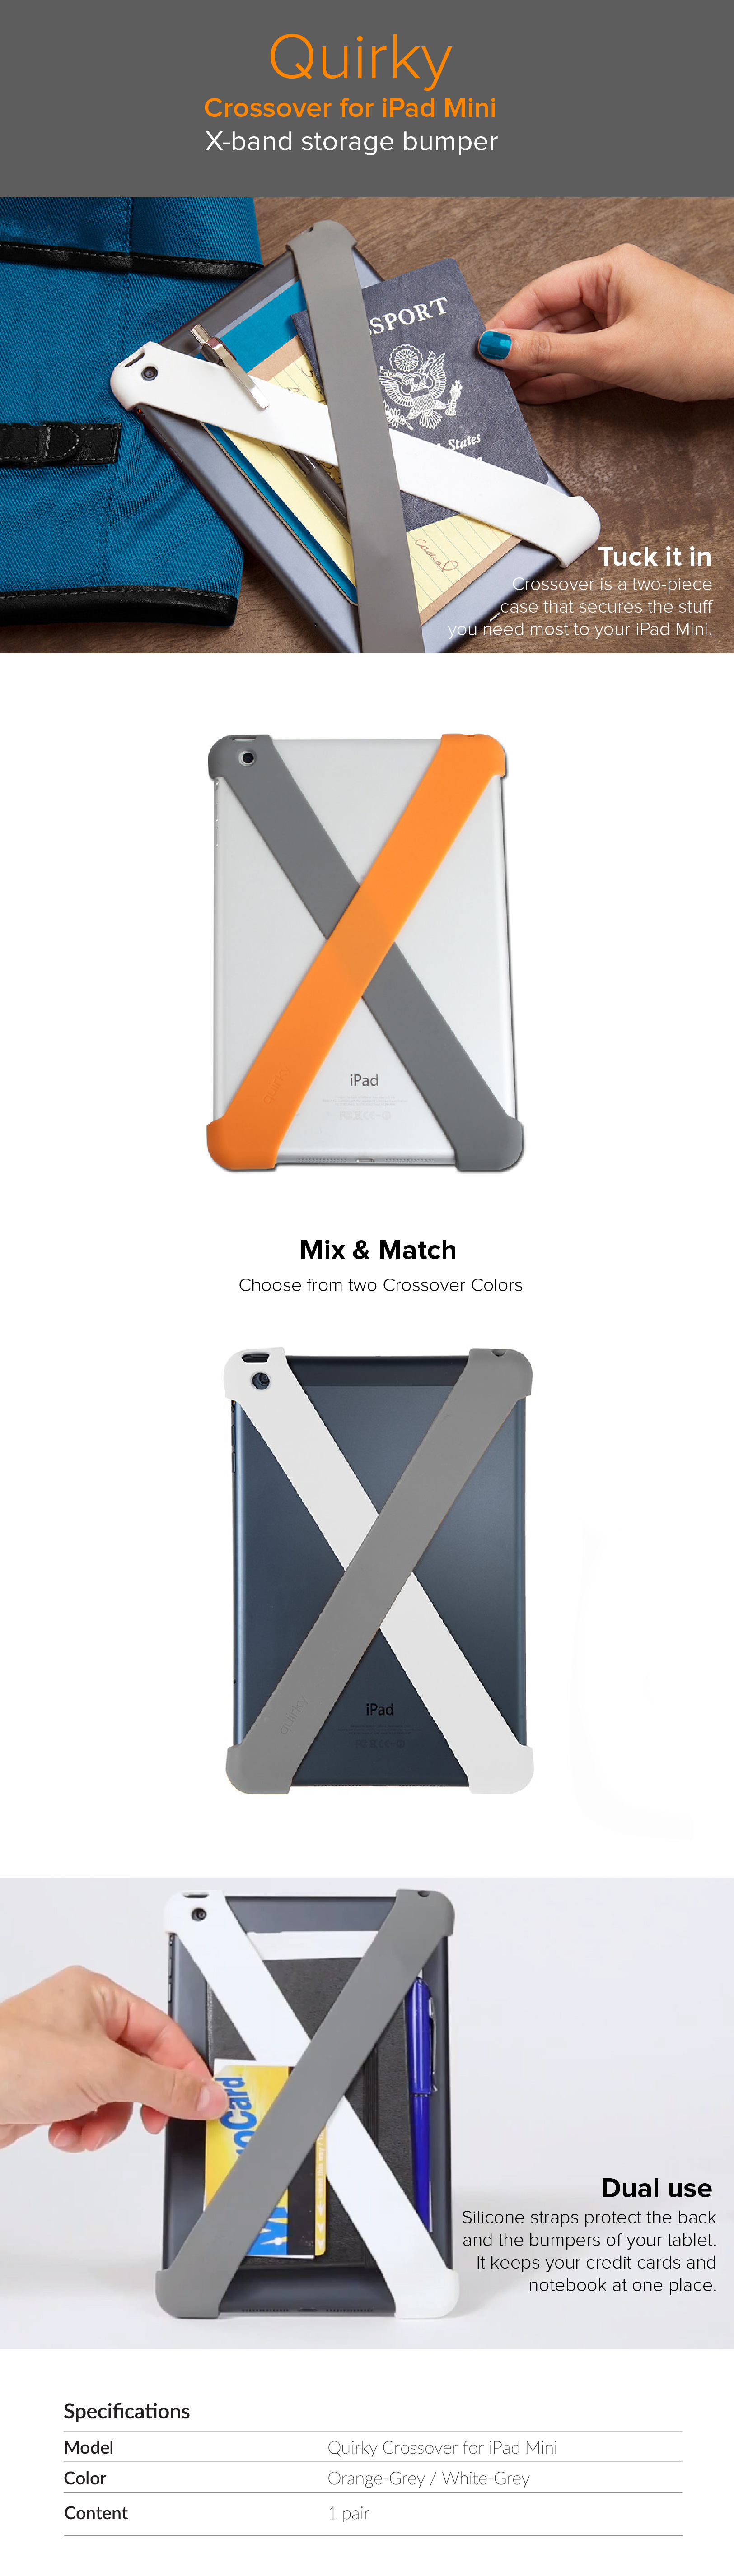 Quirky iPadMini Crossover (X-Band Stoagrage case)